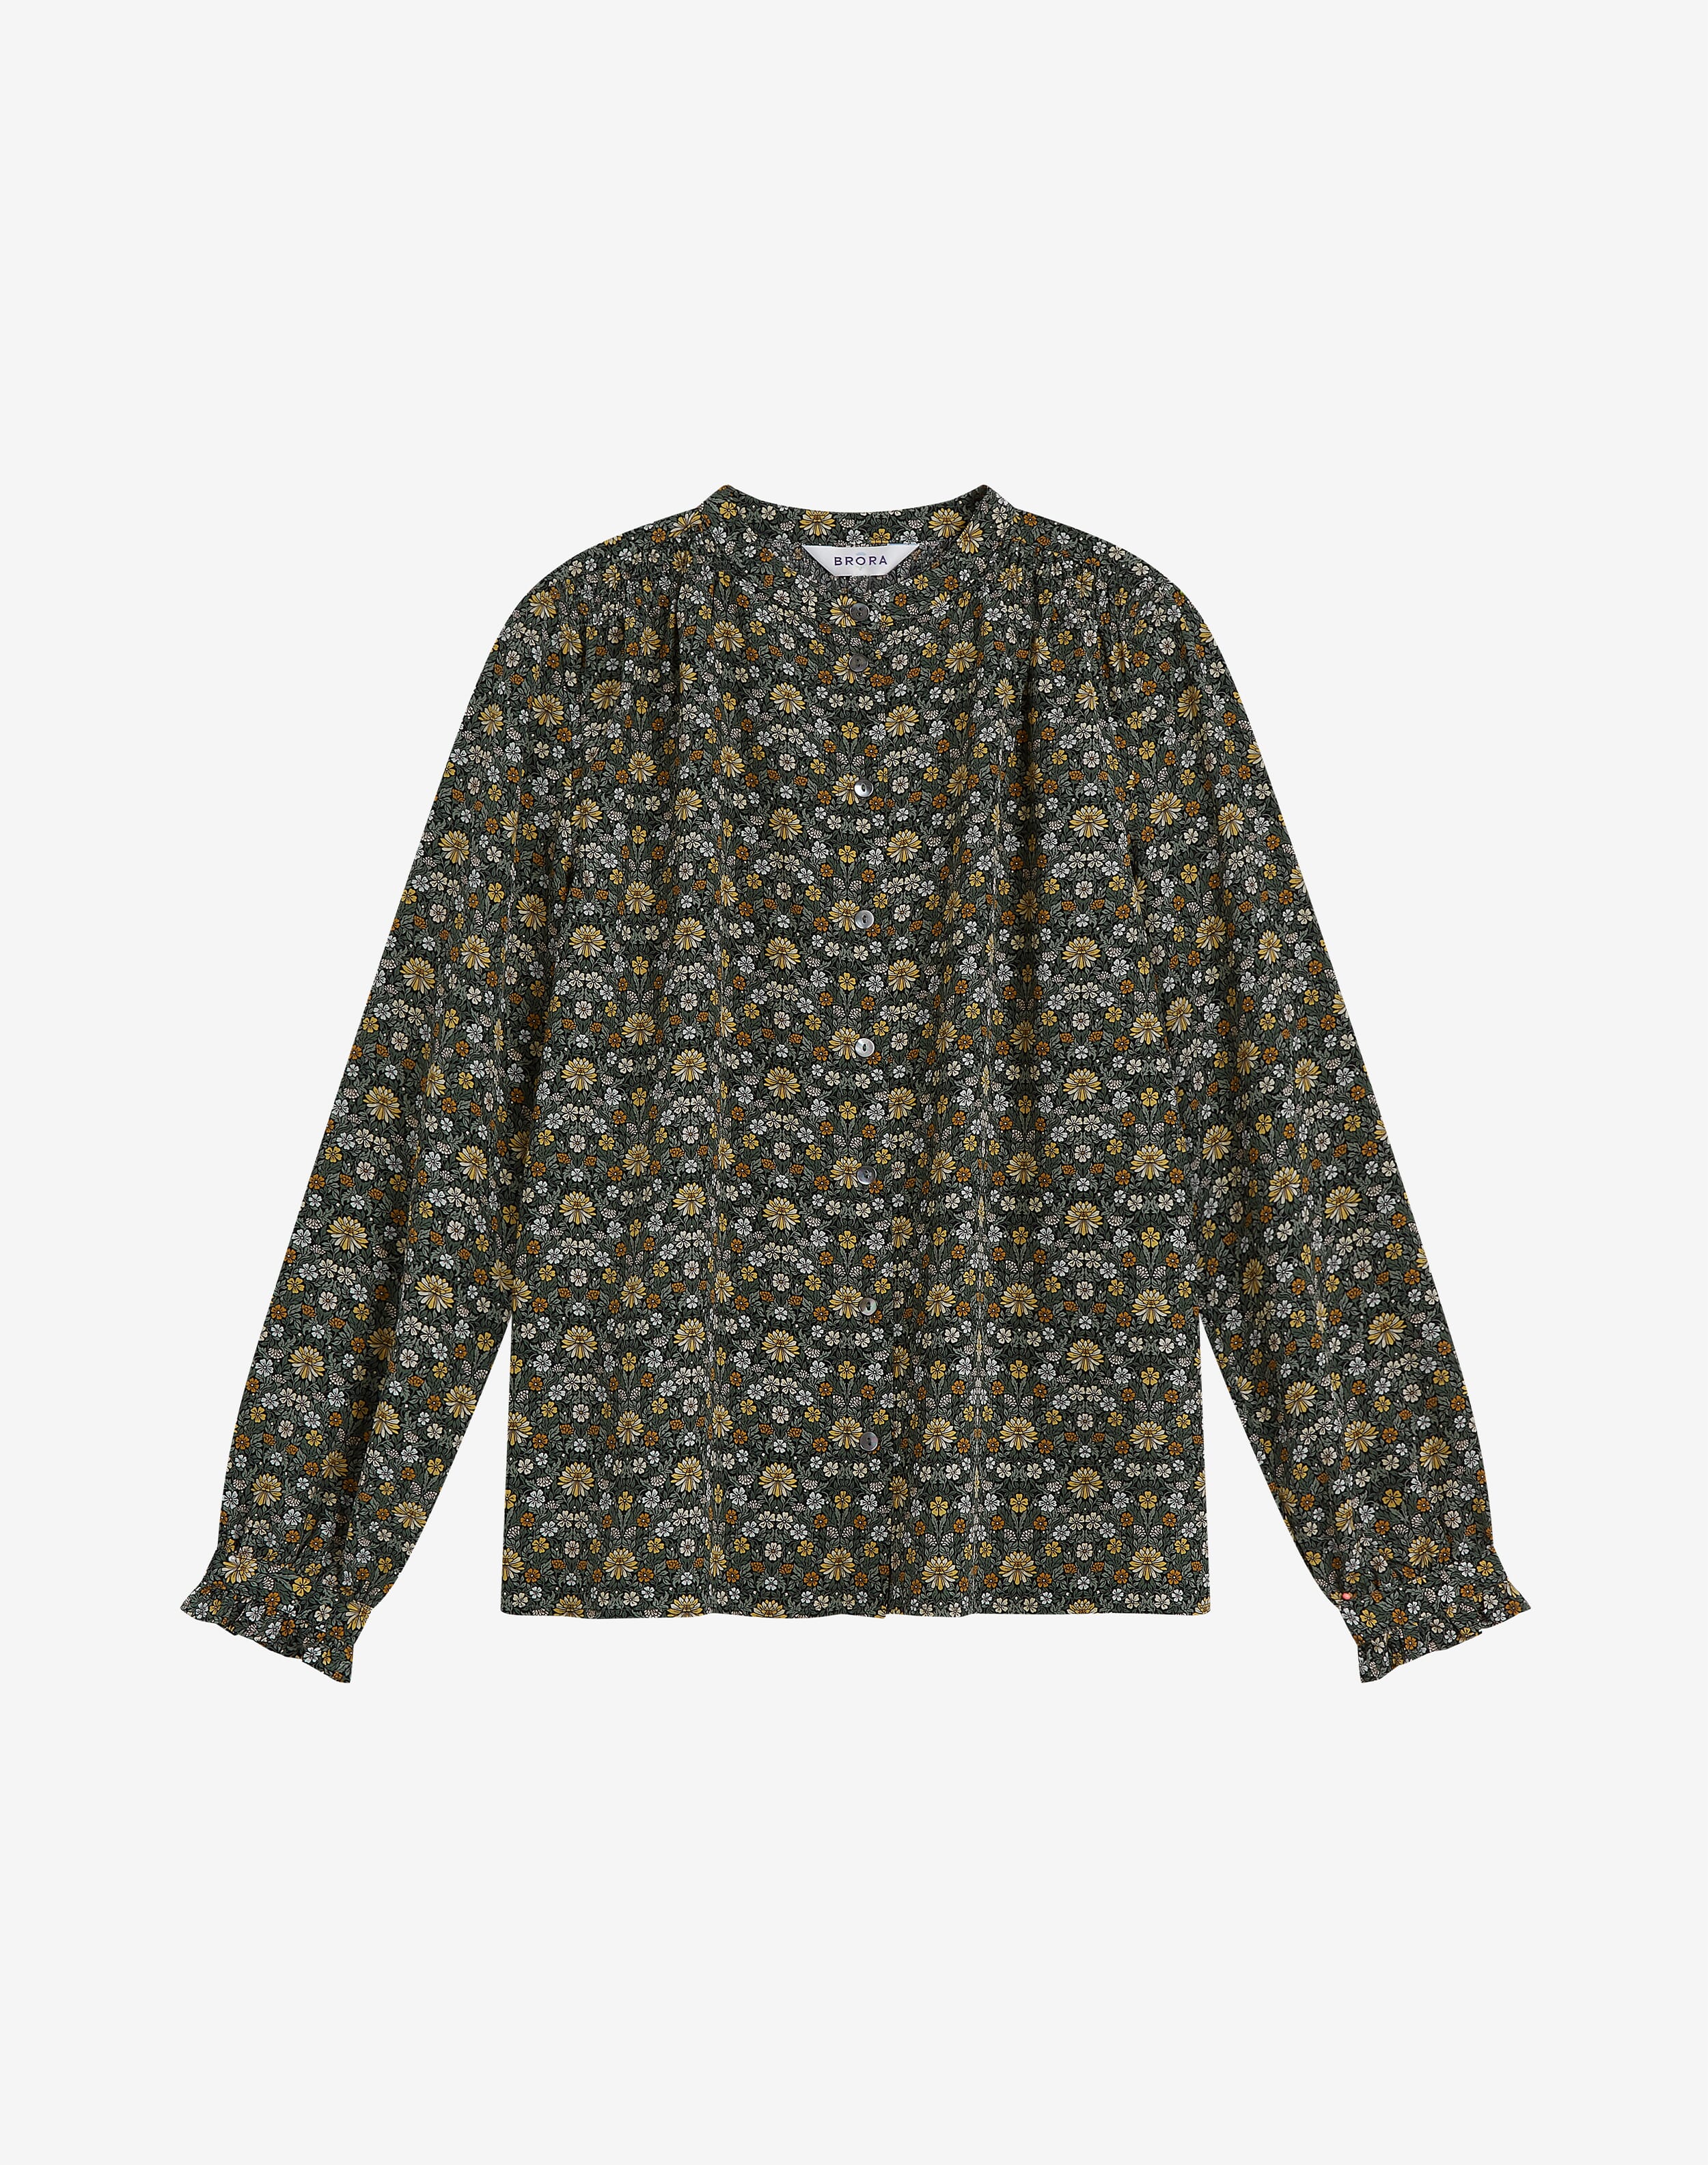 Liberty Print Silk Smocked Shirt in Olive Meadow | Blouses | Brora